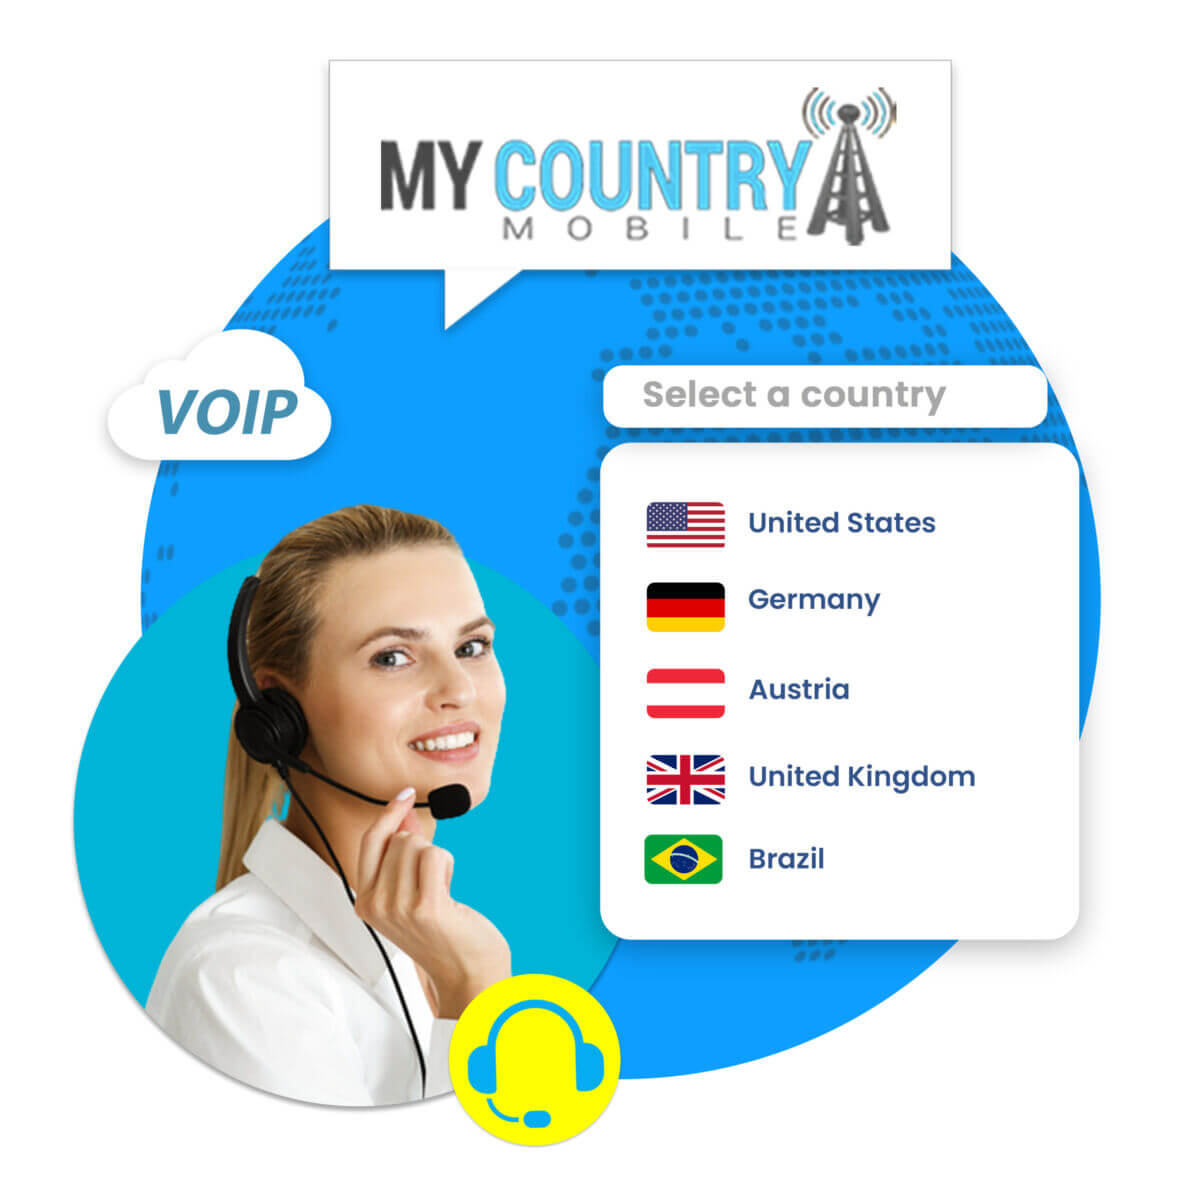 What Does VoIP Stand For